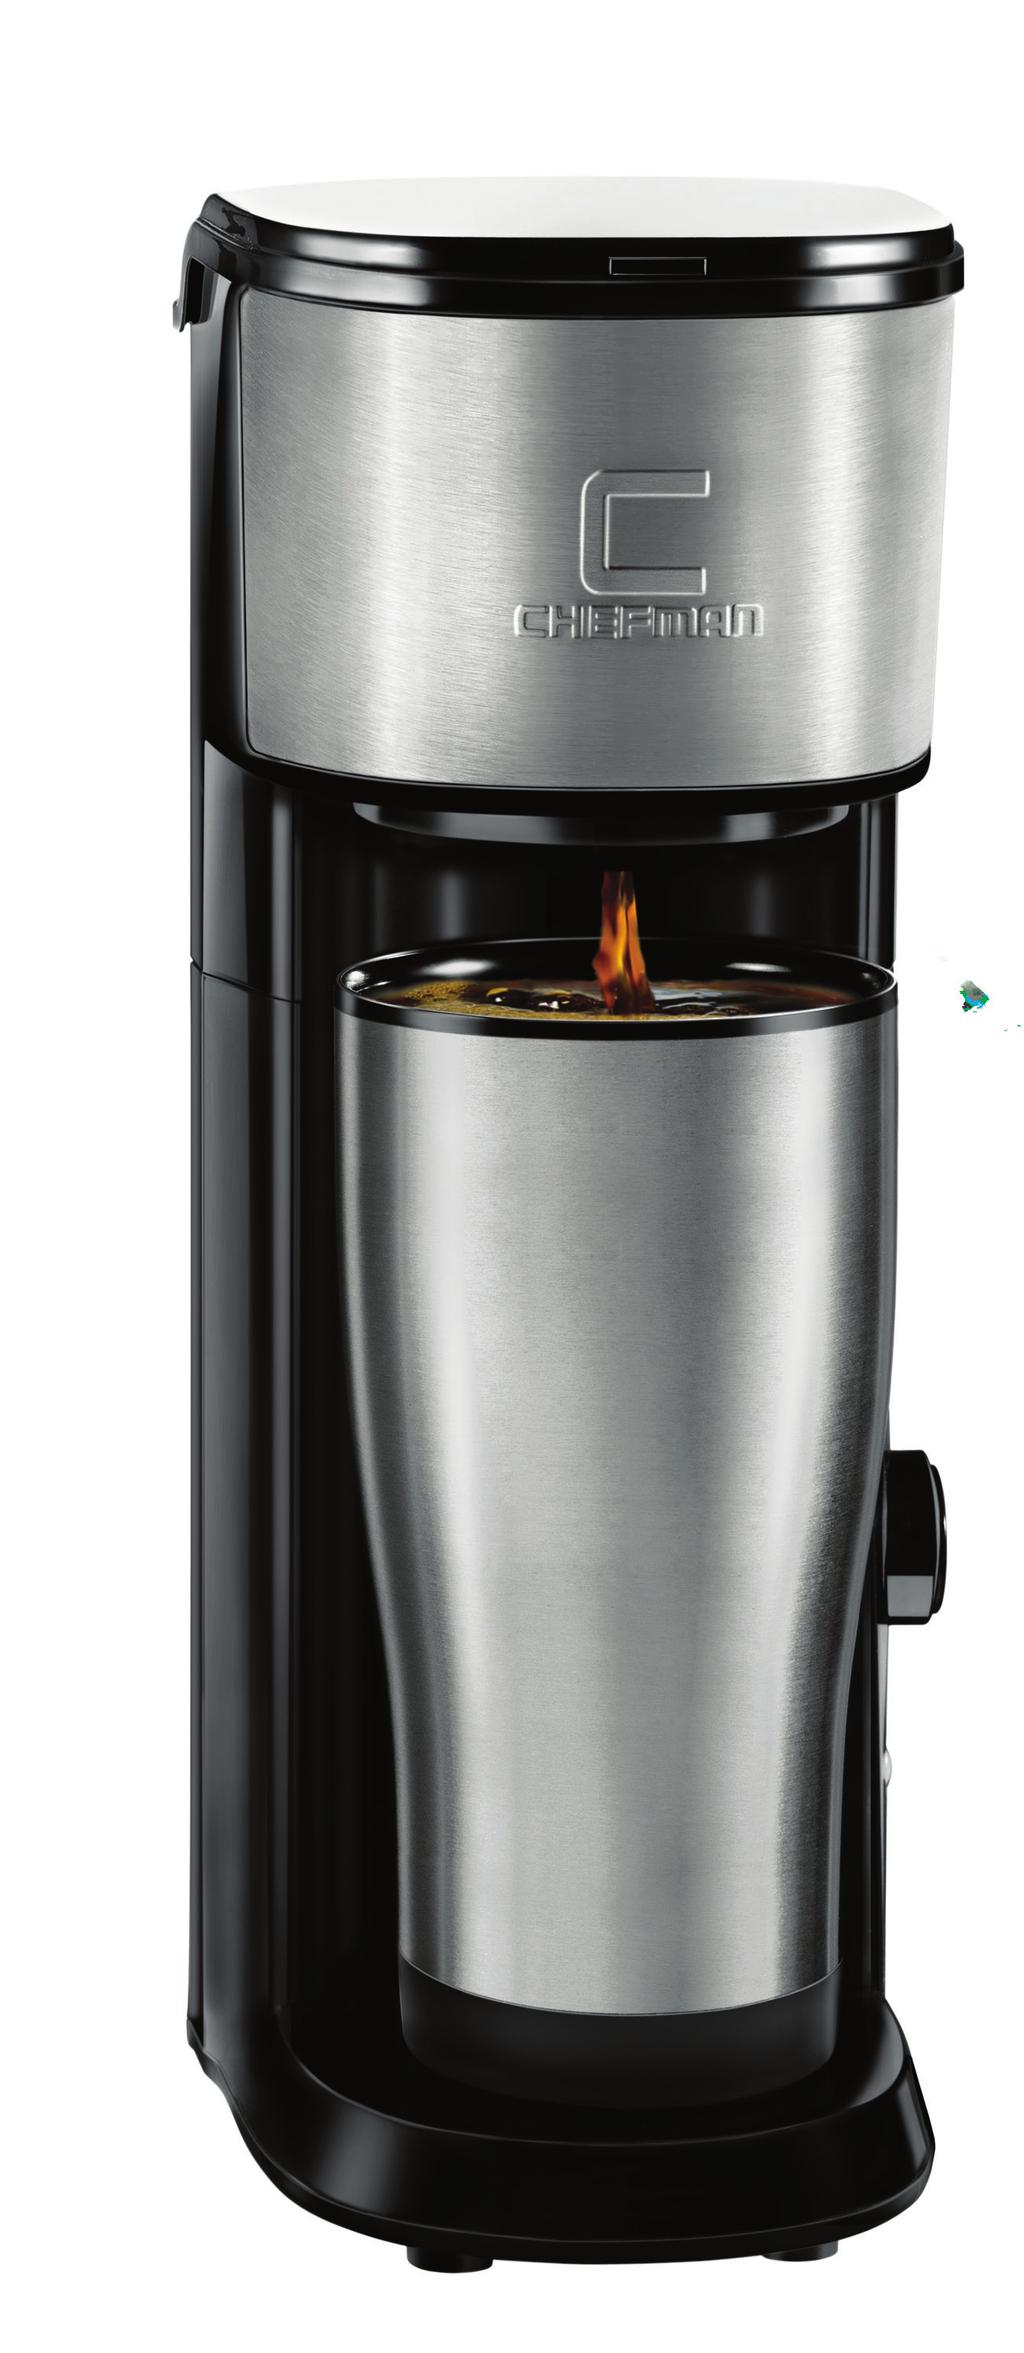 VersaBrew SINGLE SERVE COFFEE MAKER USER GUIDE Now that you have purchased a Chefman product you can rest assured in the knowledge that as well as your 1-year parts and labor warranty you have the